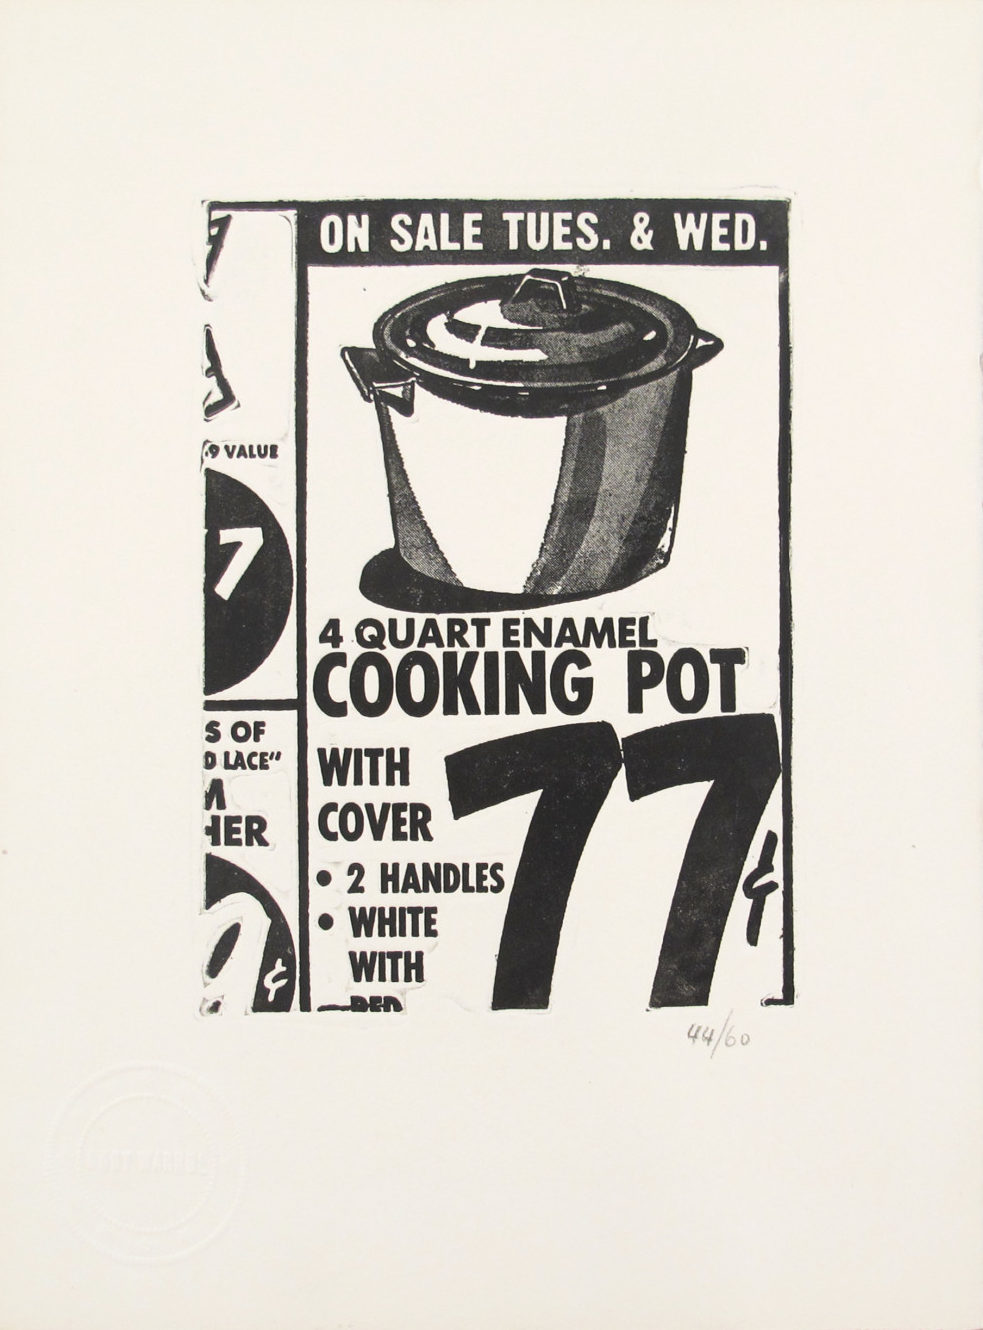 Andy Warhol | Cooking Pot 1 | 1962 | Image of Artists' work.